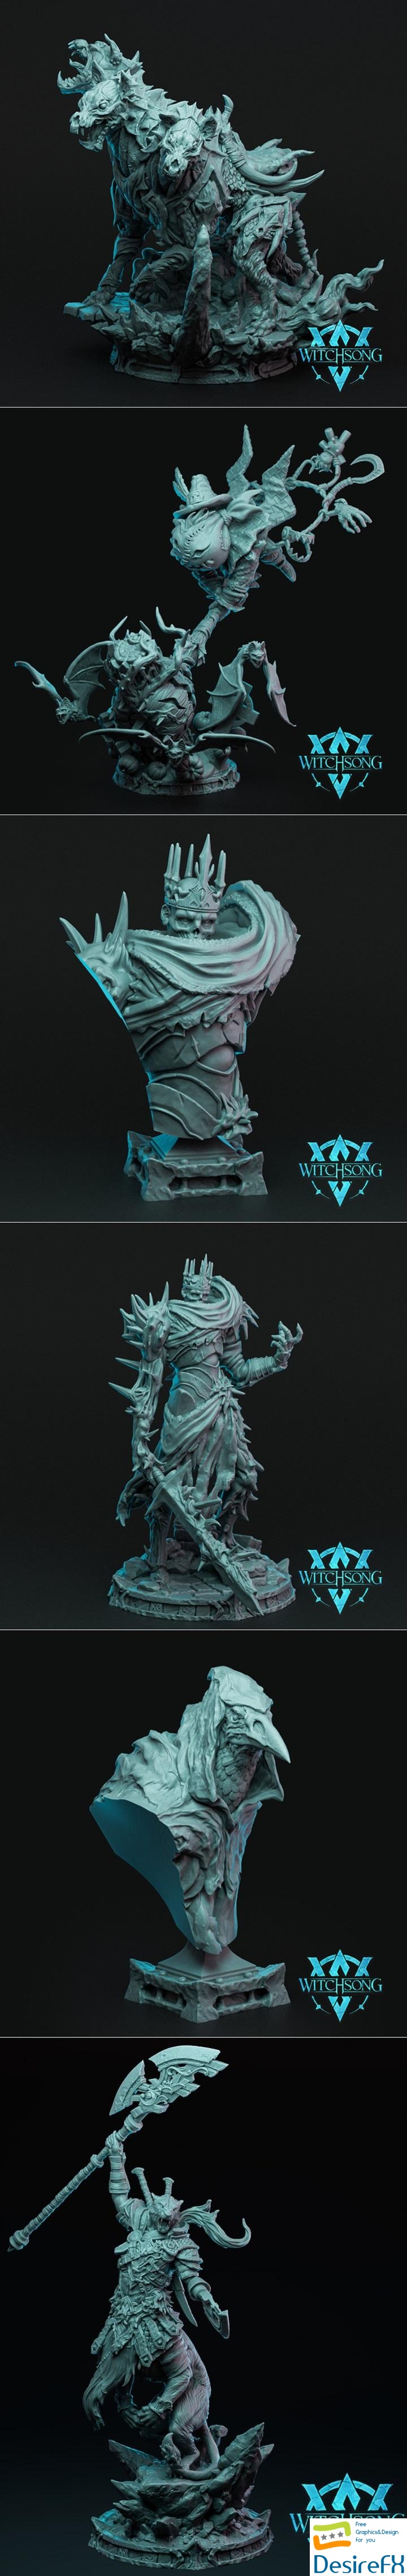 Witchsong Miniatures Collection 3D Print